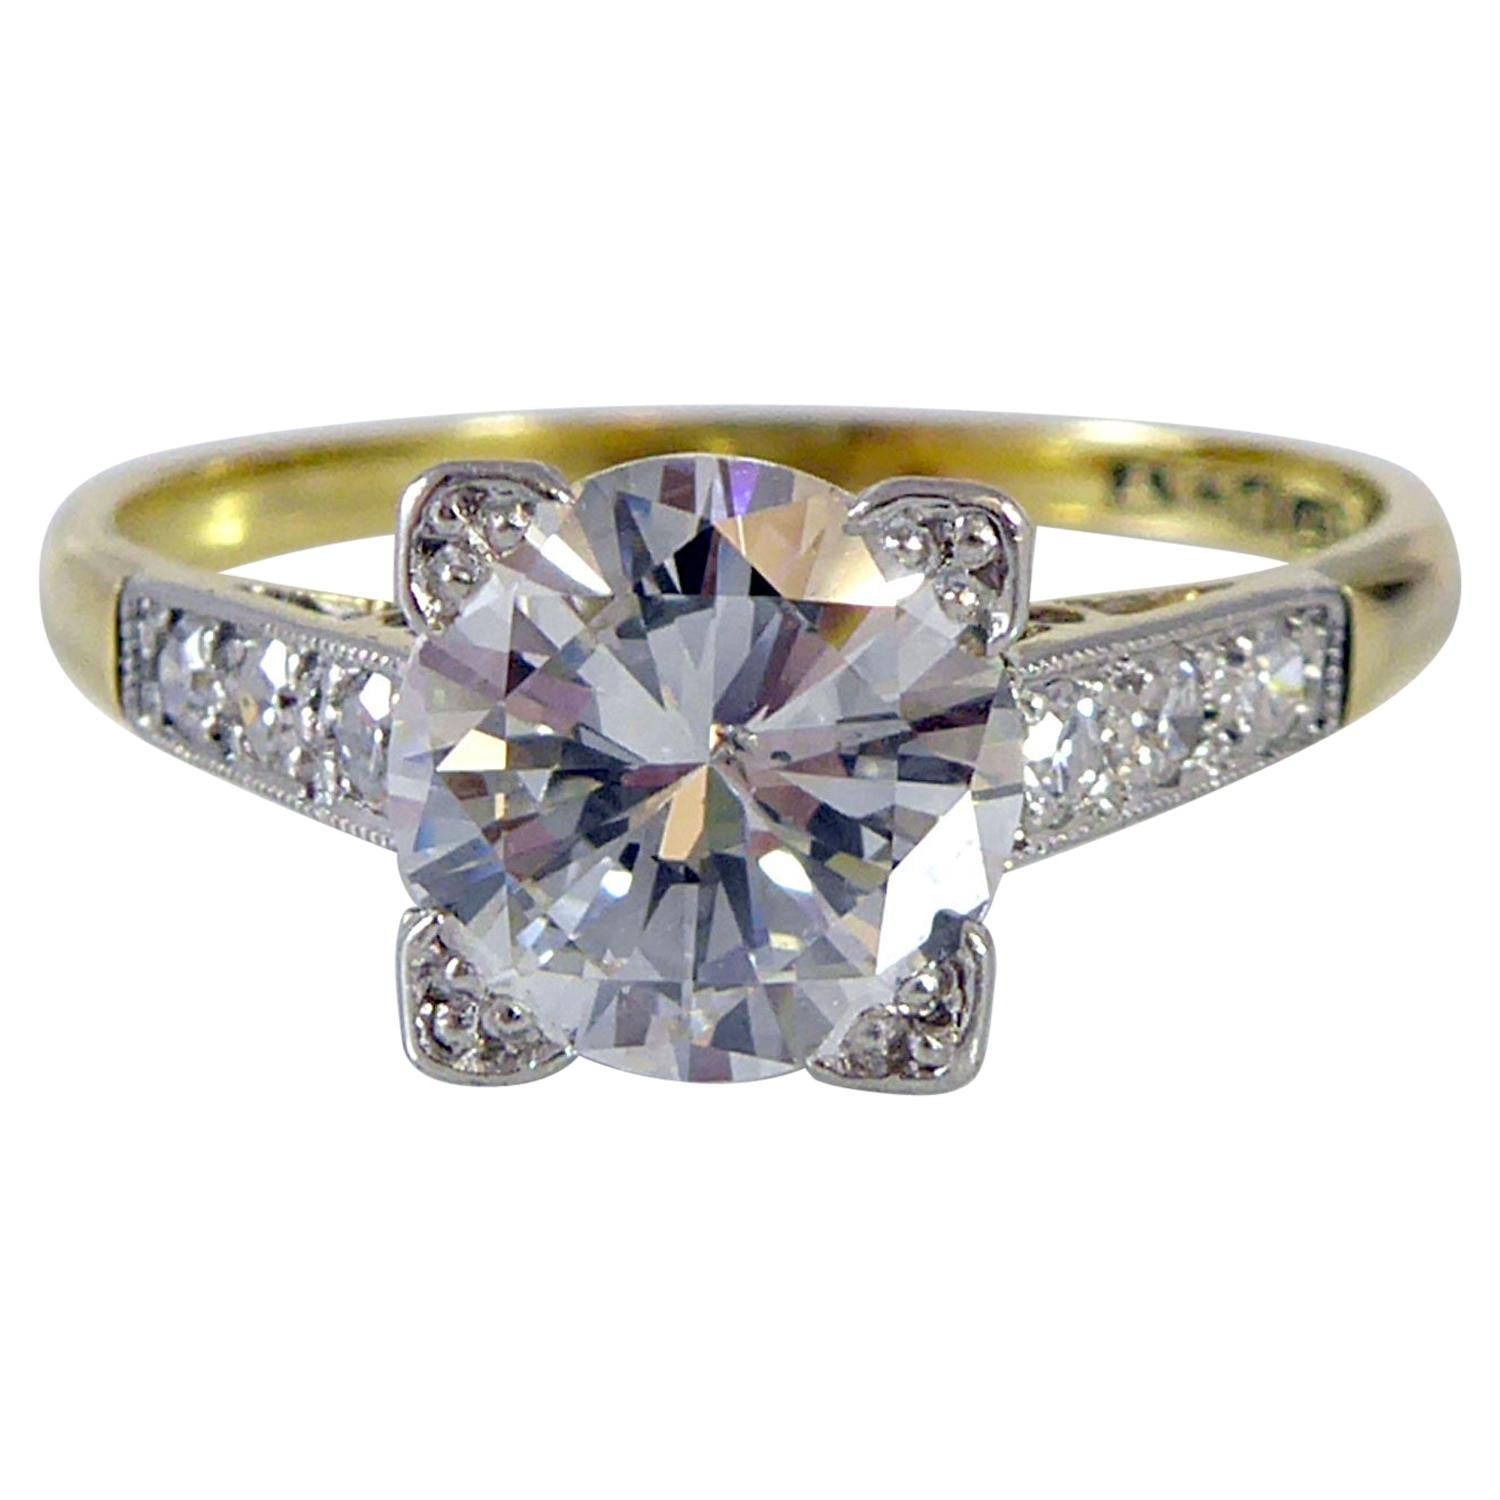 Vintage 1.47 Carat Diamond Solitaire Ring with Diamond Shoulders